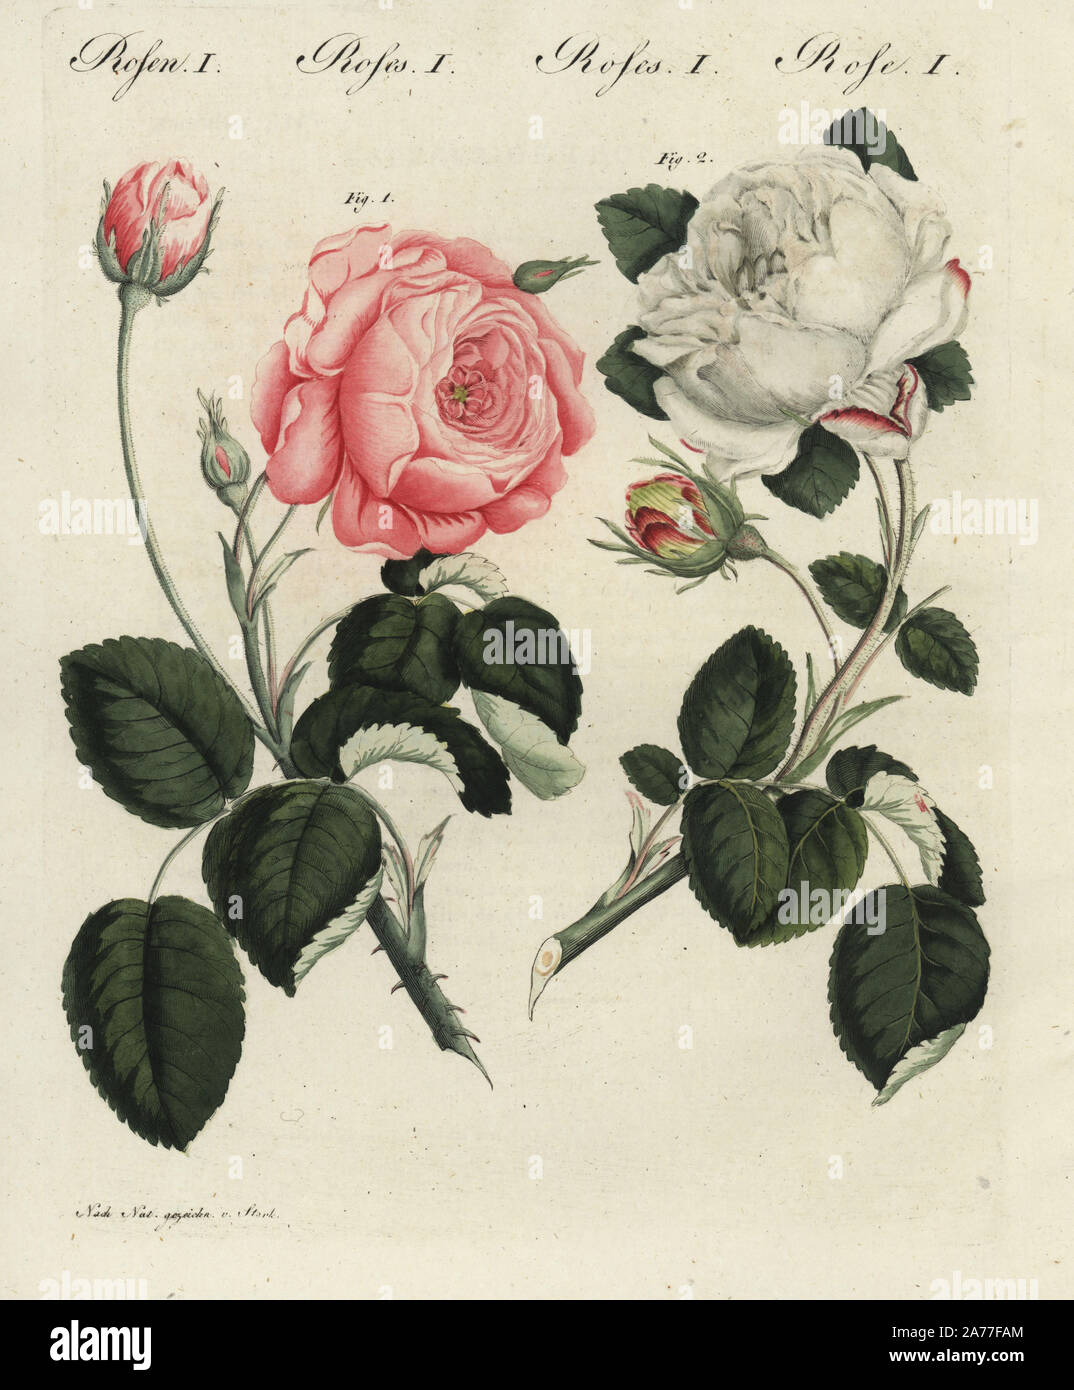 Pink German centifolia rose, Rosa centifolia germanica, and white unique rose, Rosa unica. Handcoloured copperplate engraving from an illustration drawn from nature by Stark from Bertuch's Bilderbuch fur Kinder (Picture Book for Children), Weimar, 1798. Stock Photo